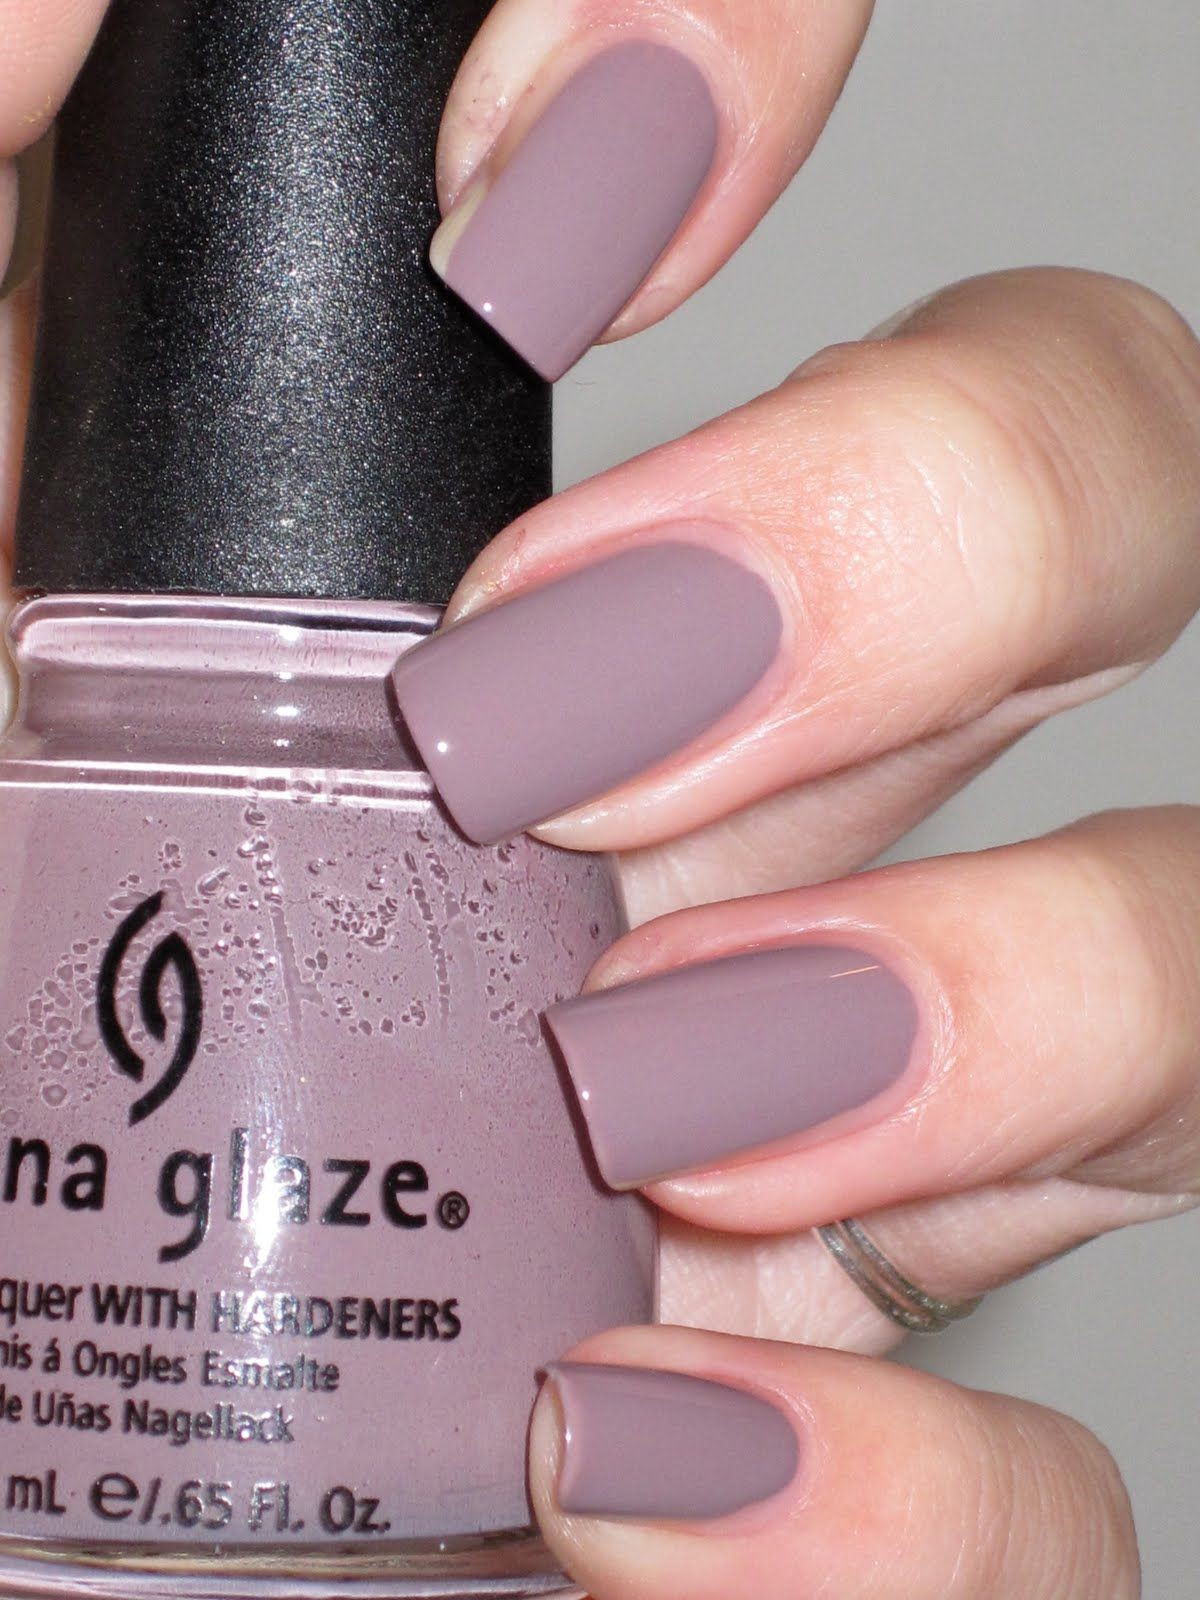 Nice Nail Colors For Dark Skin
 China Glaze Channelesque My favorite color just the